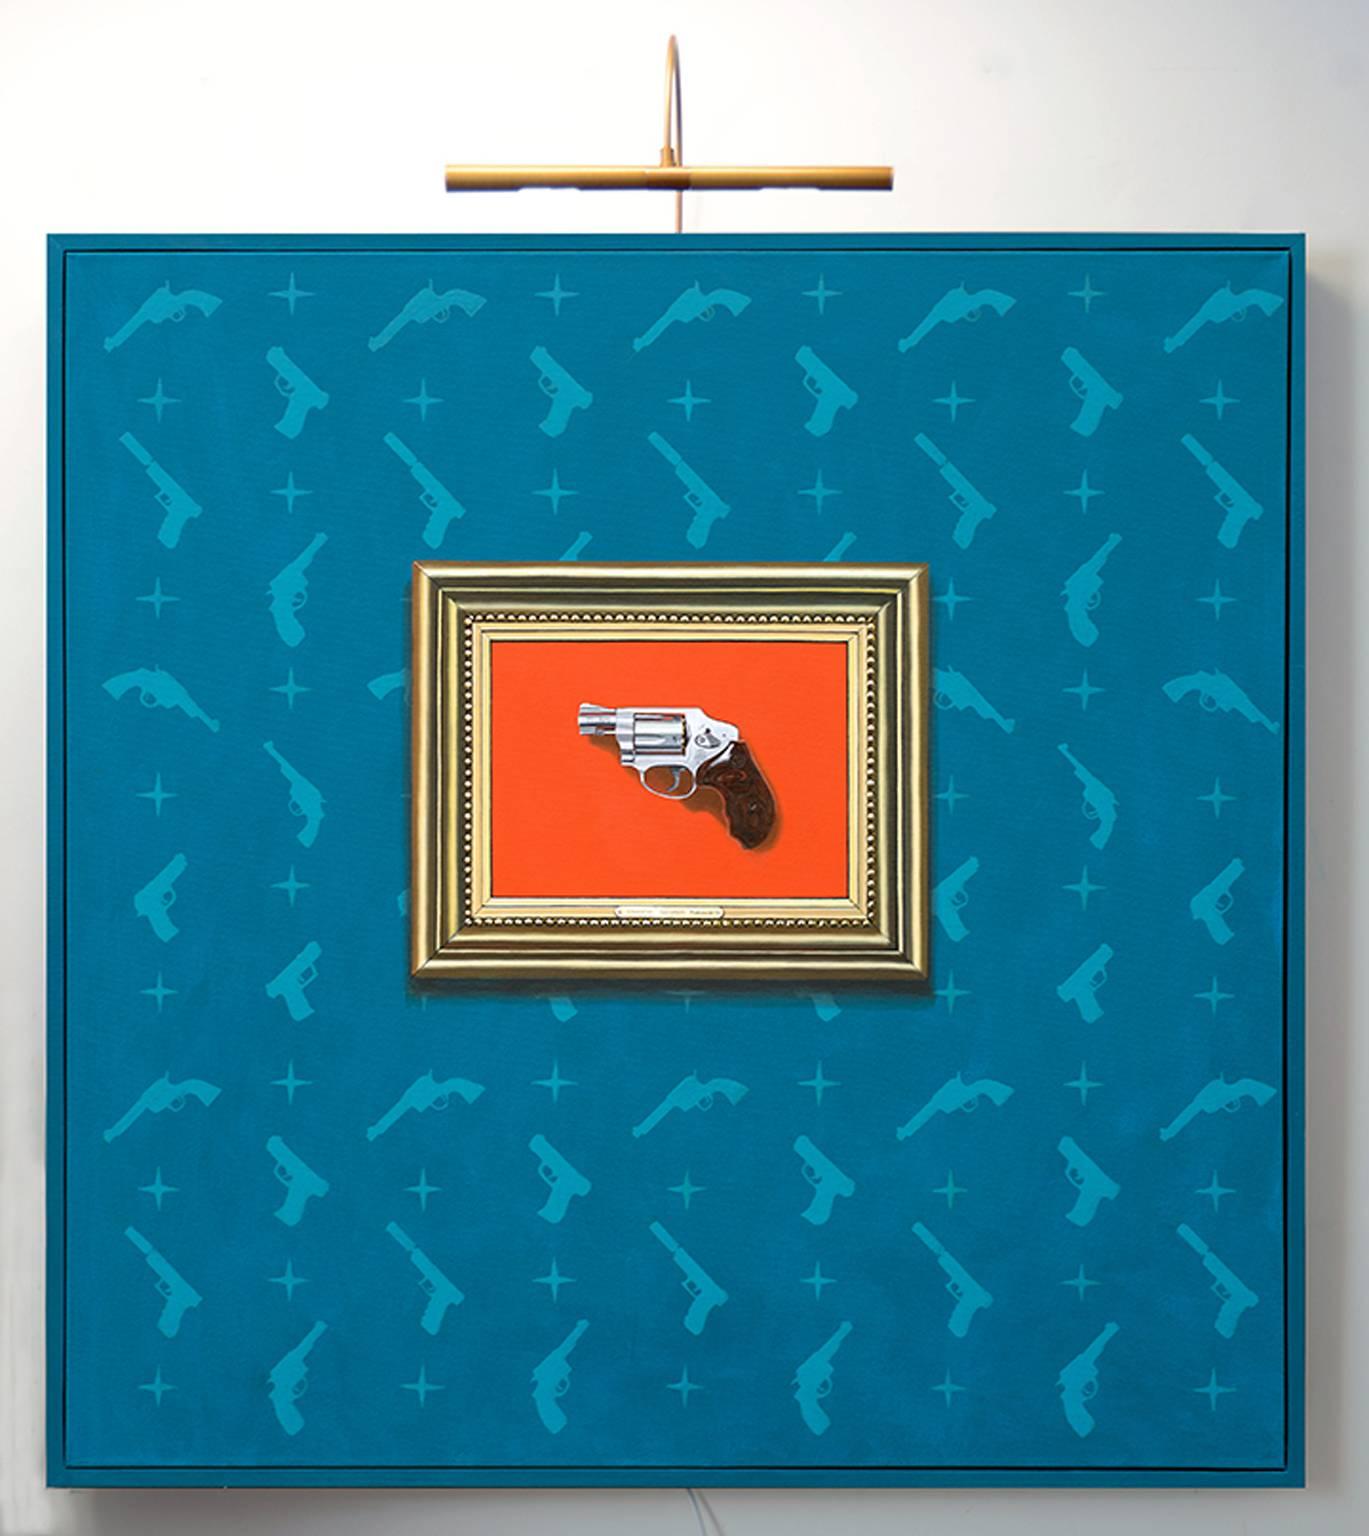 "The Armory Show" by Gordon Lee features a painting of a gun on a orange background in an ornate painted frame "hanging" on a blue background with a pattern of contrasting blue guns.  There is a functional light mounted to the top of the piece which